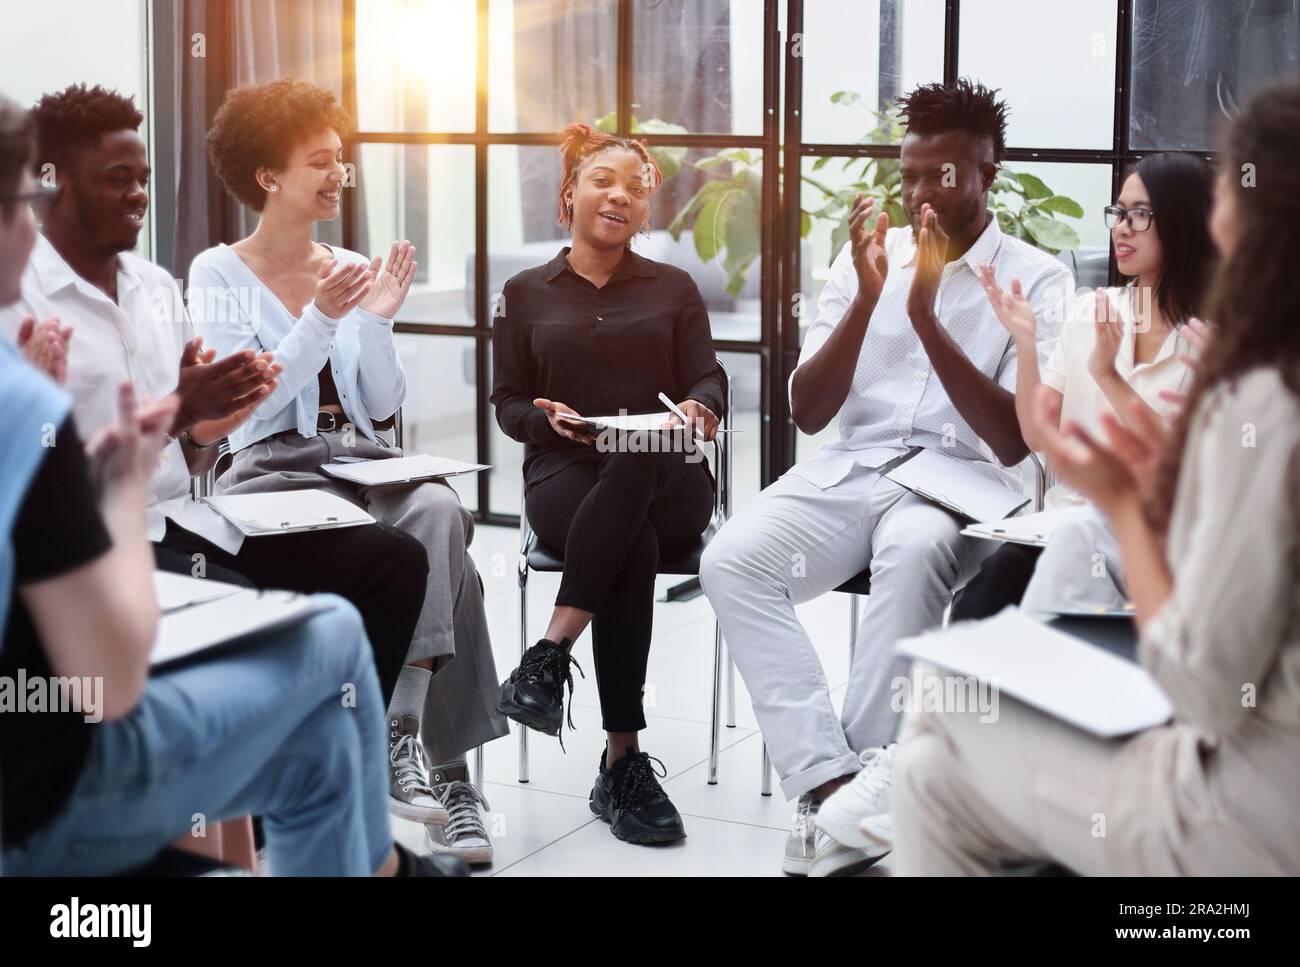 Conference Training Planning Learning Coaching Business Concept Stock Photo